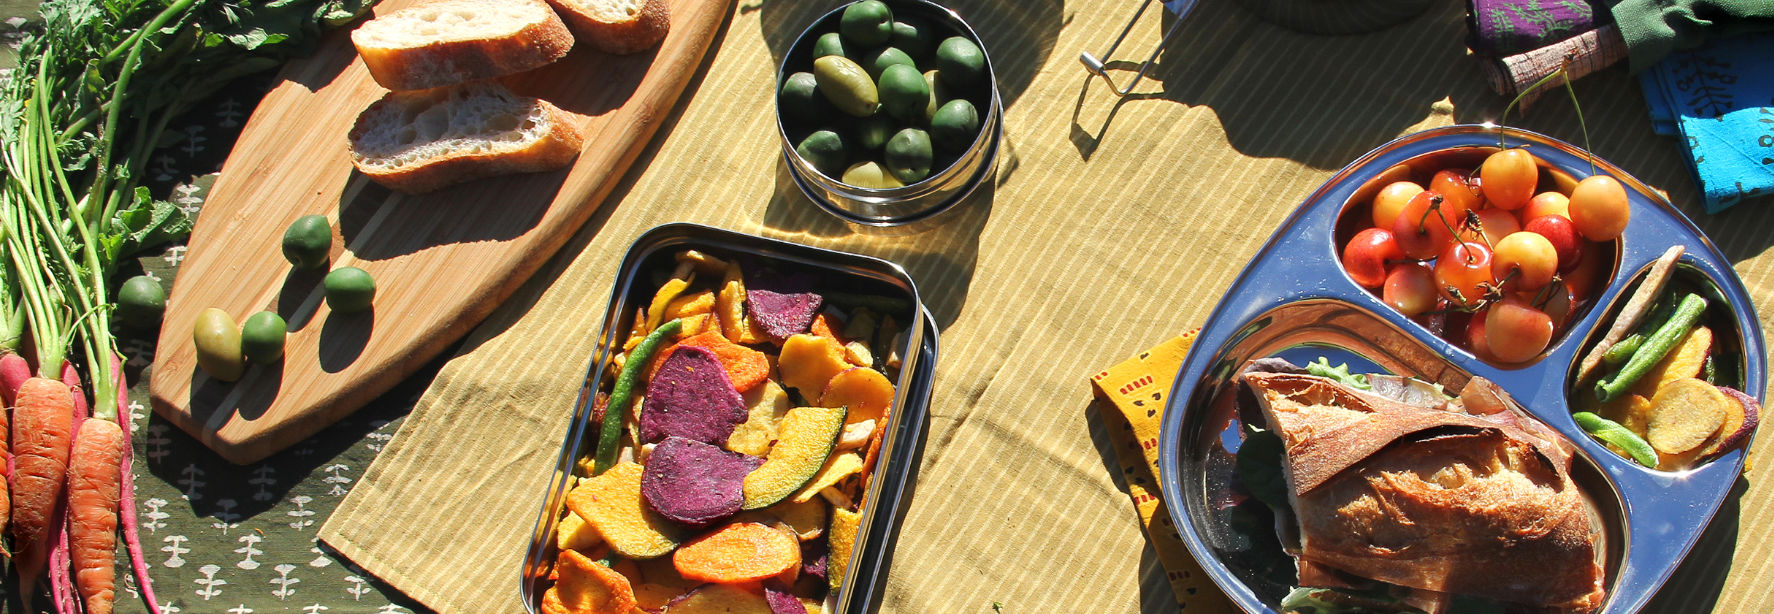 Stainless steel containers and wood serving board with fruits, veggies, and a sandwich laying on colorful picnic blankets.